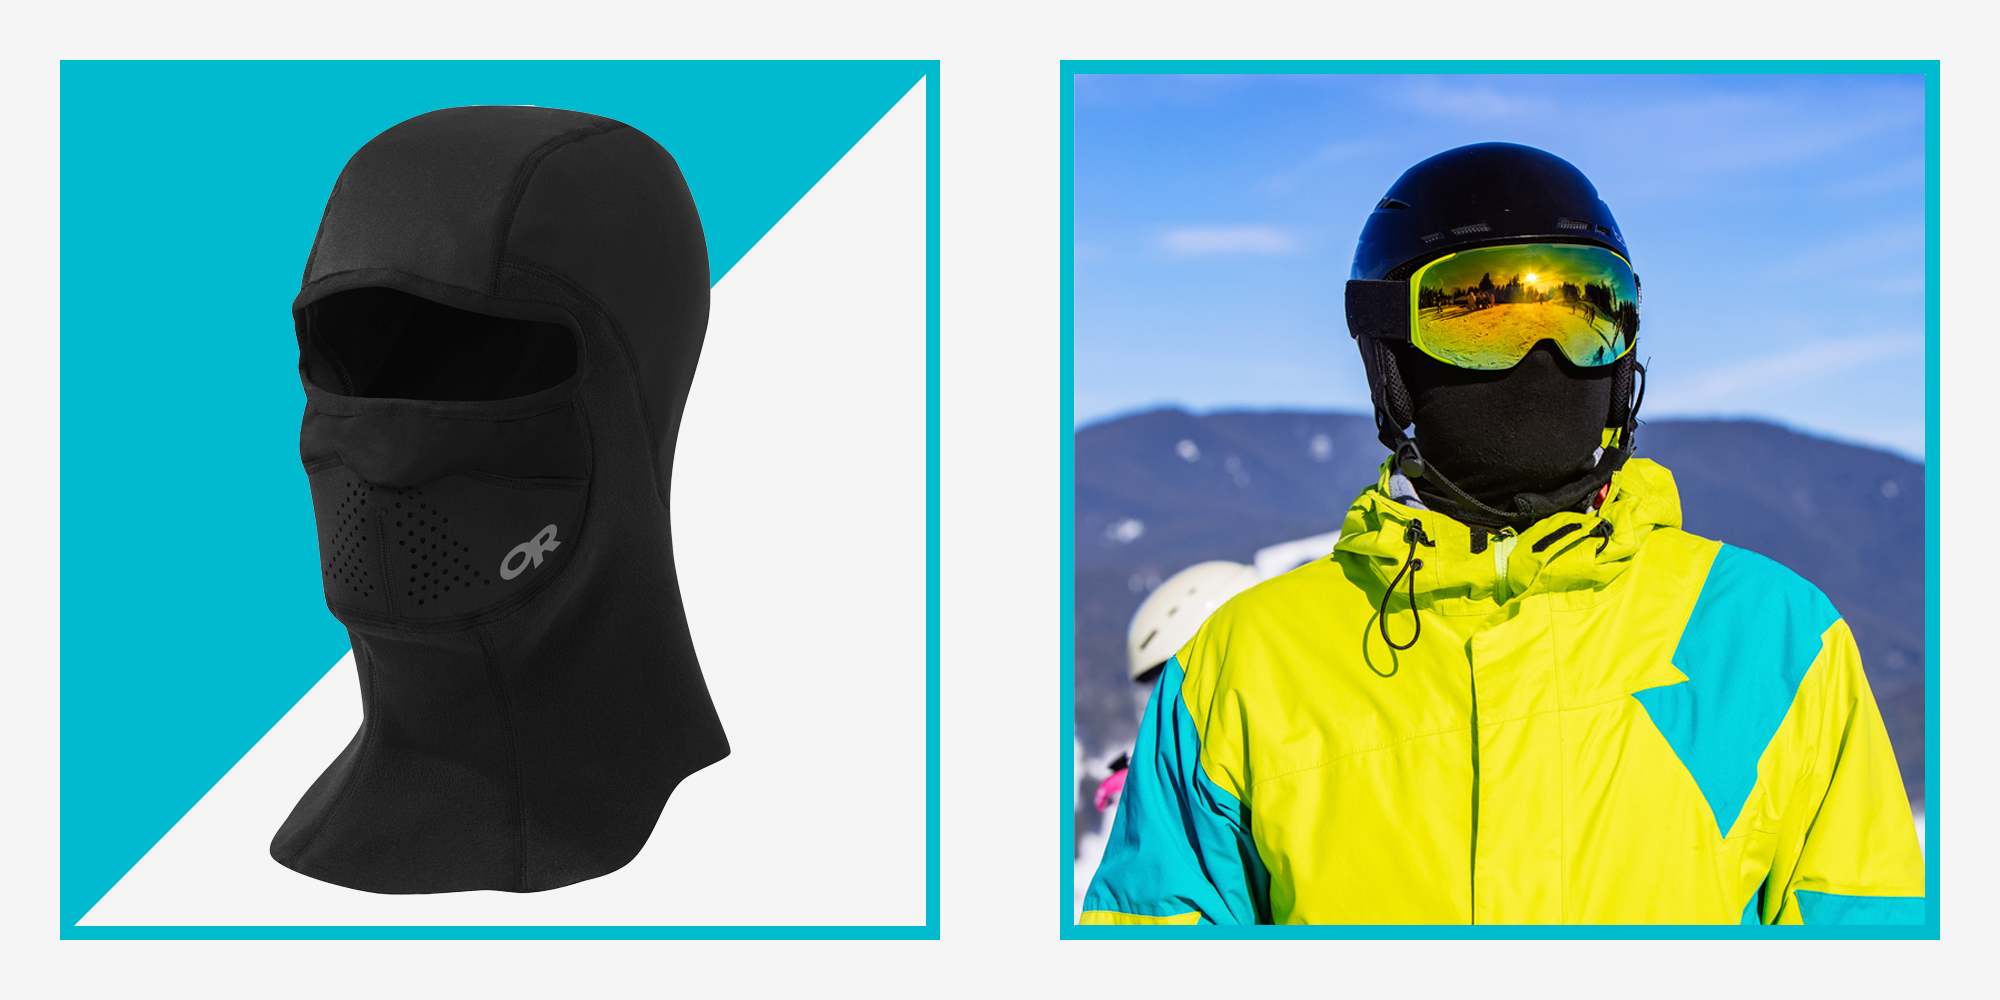 Hats and balaclavas for men and women, extreme cold weather